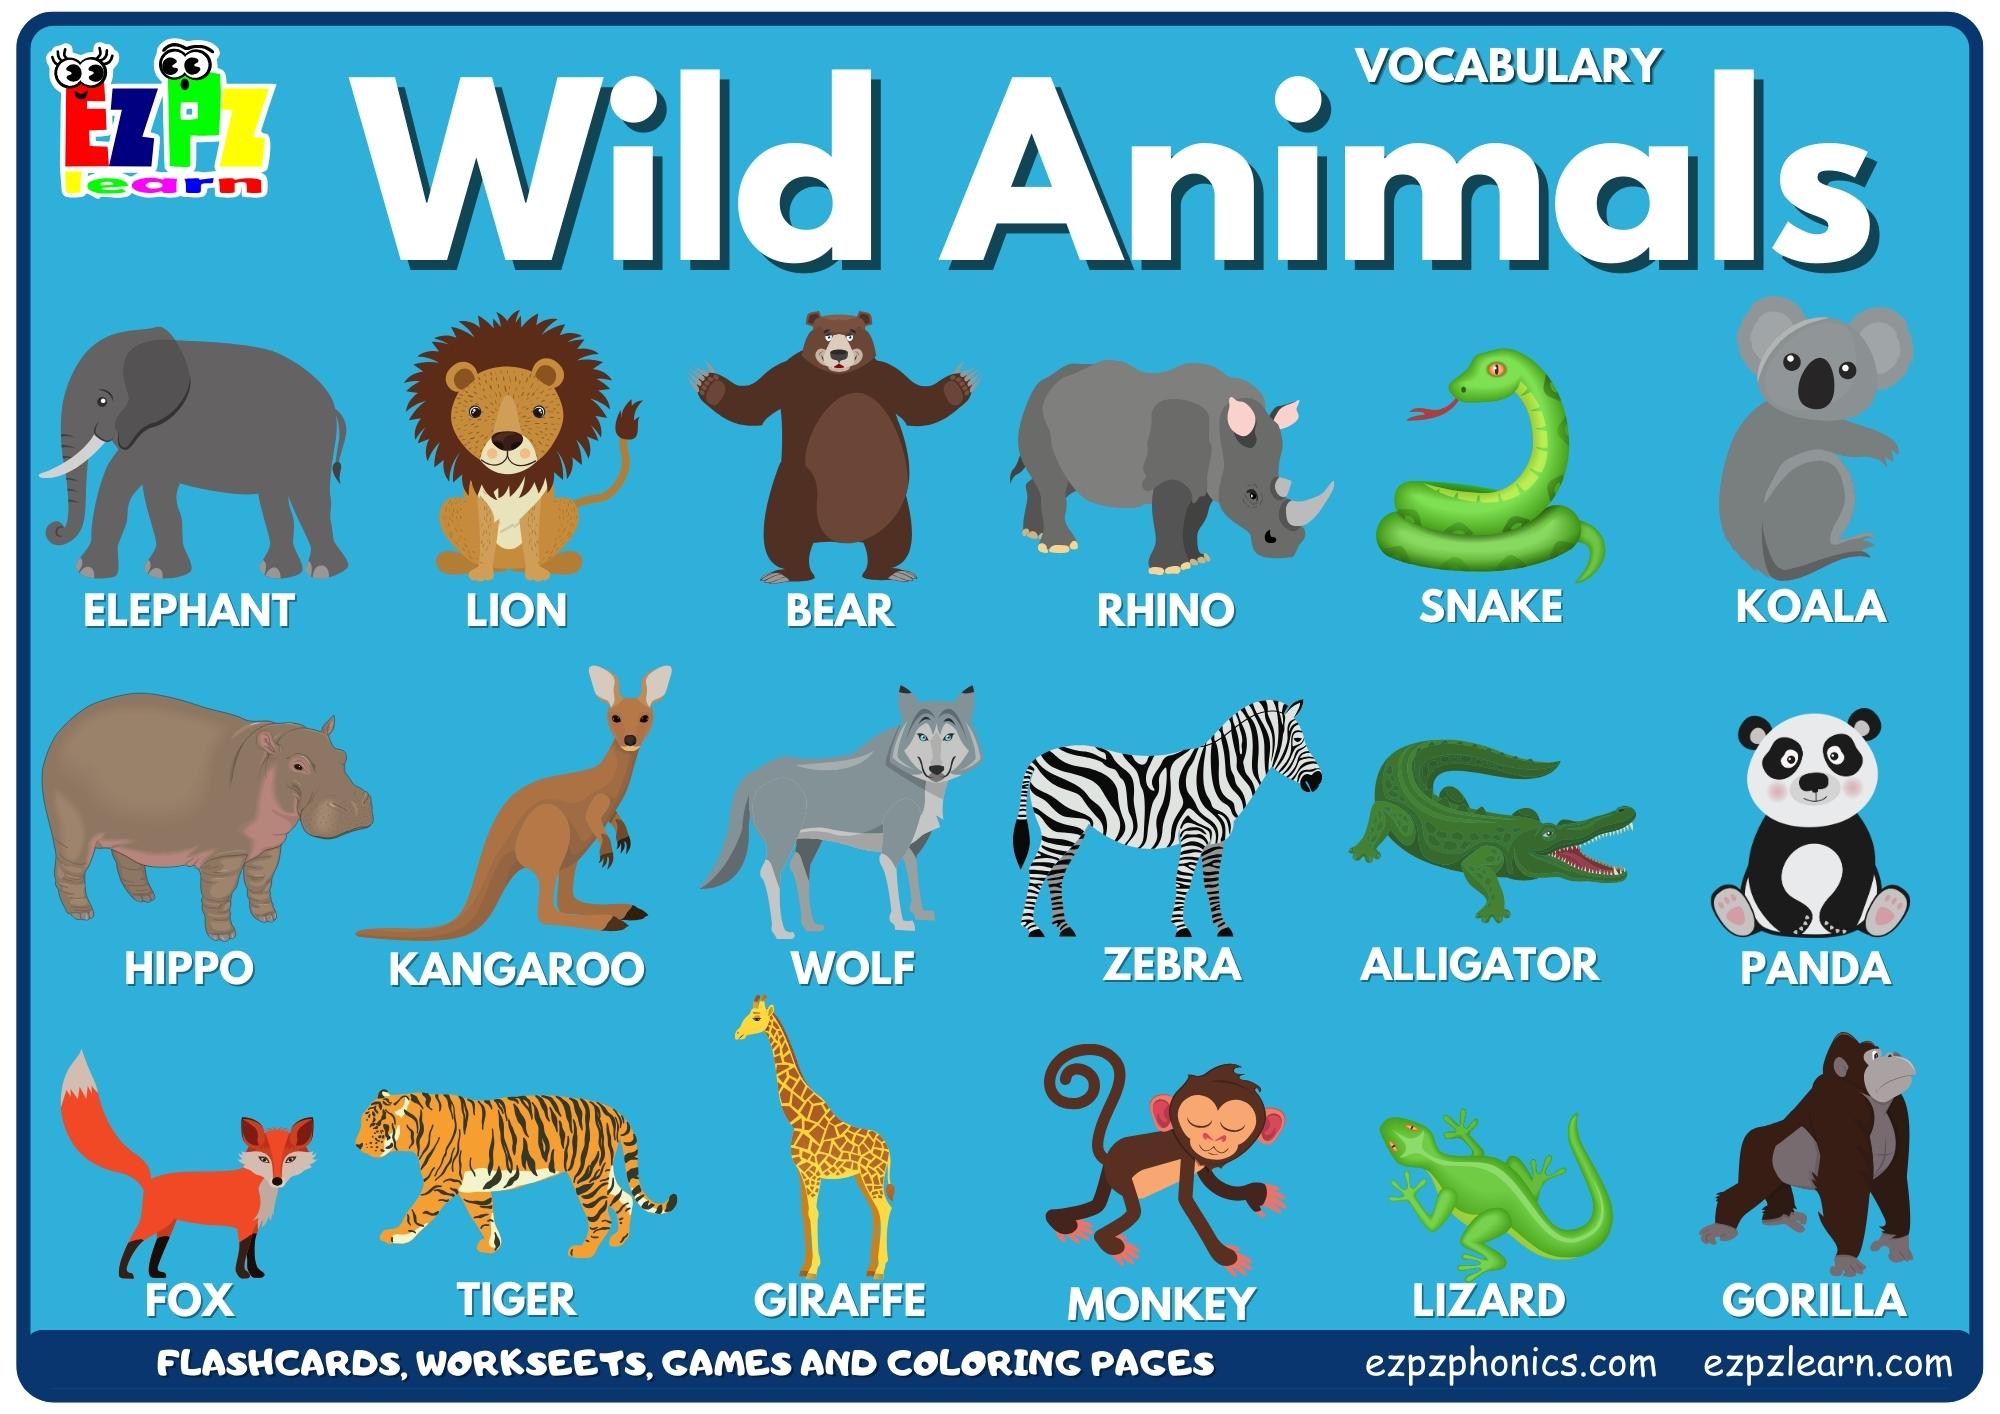 Wild Animals Vocabulary Picture Dictionary Join Now for Free